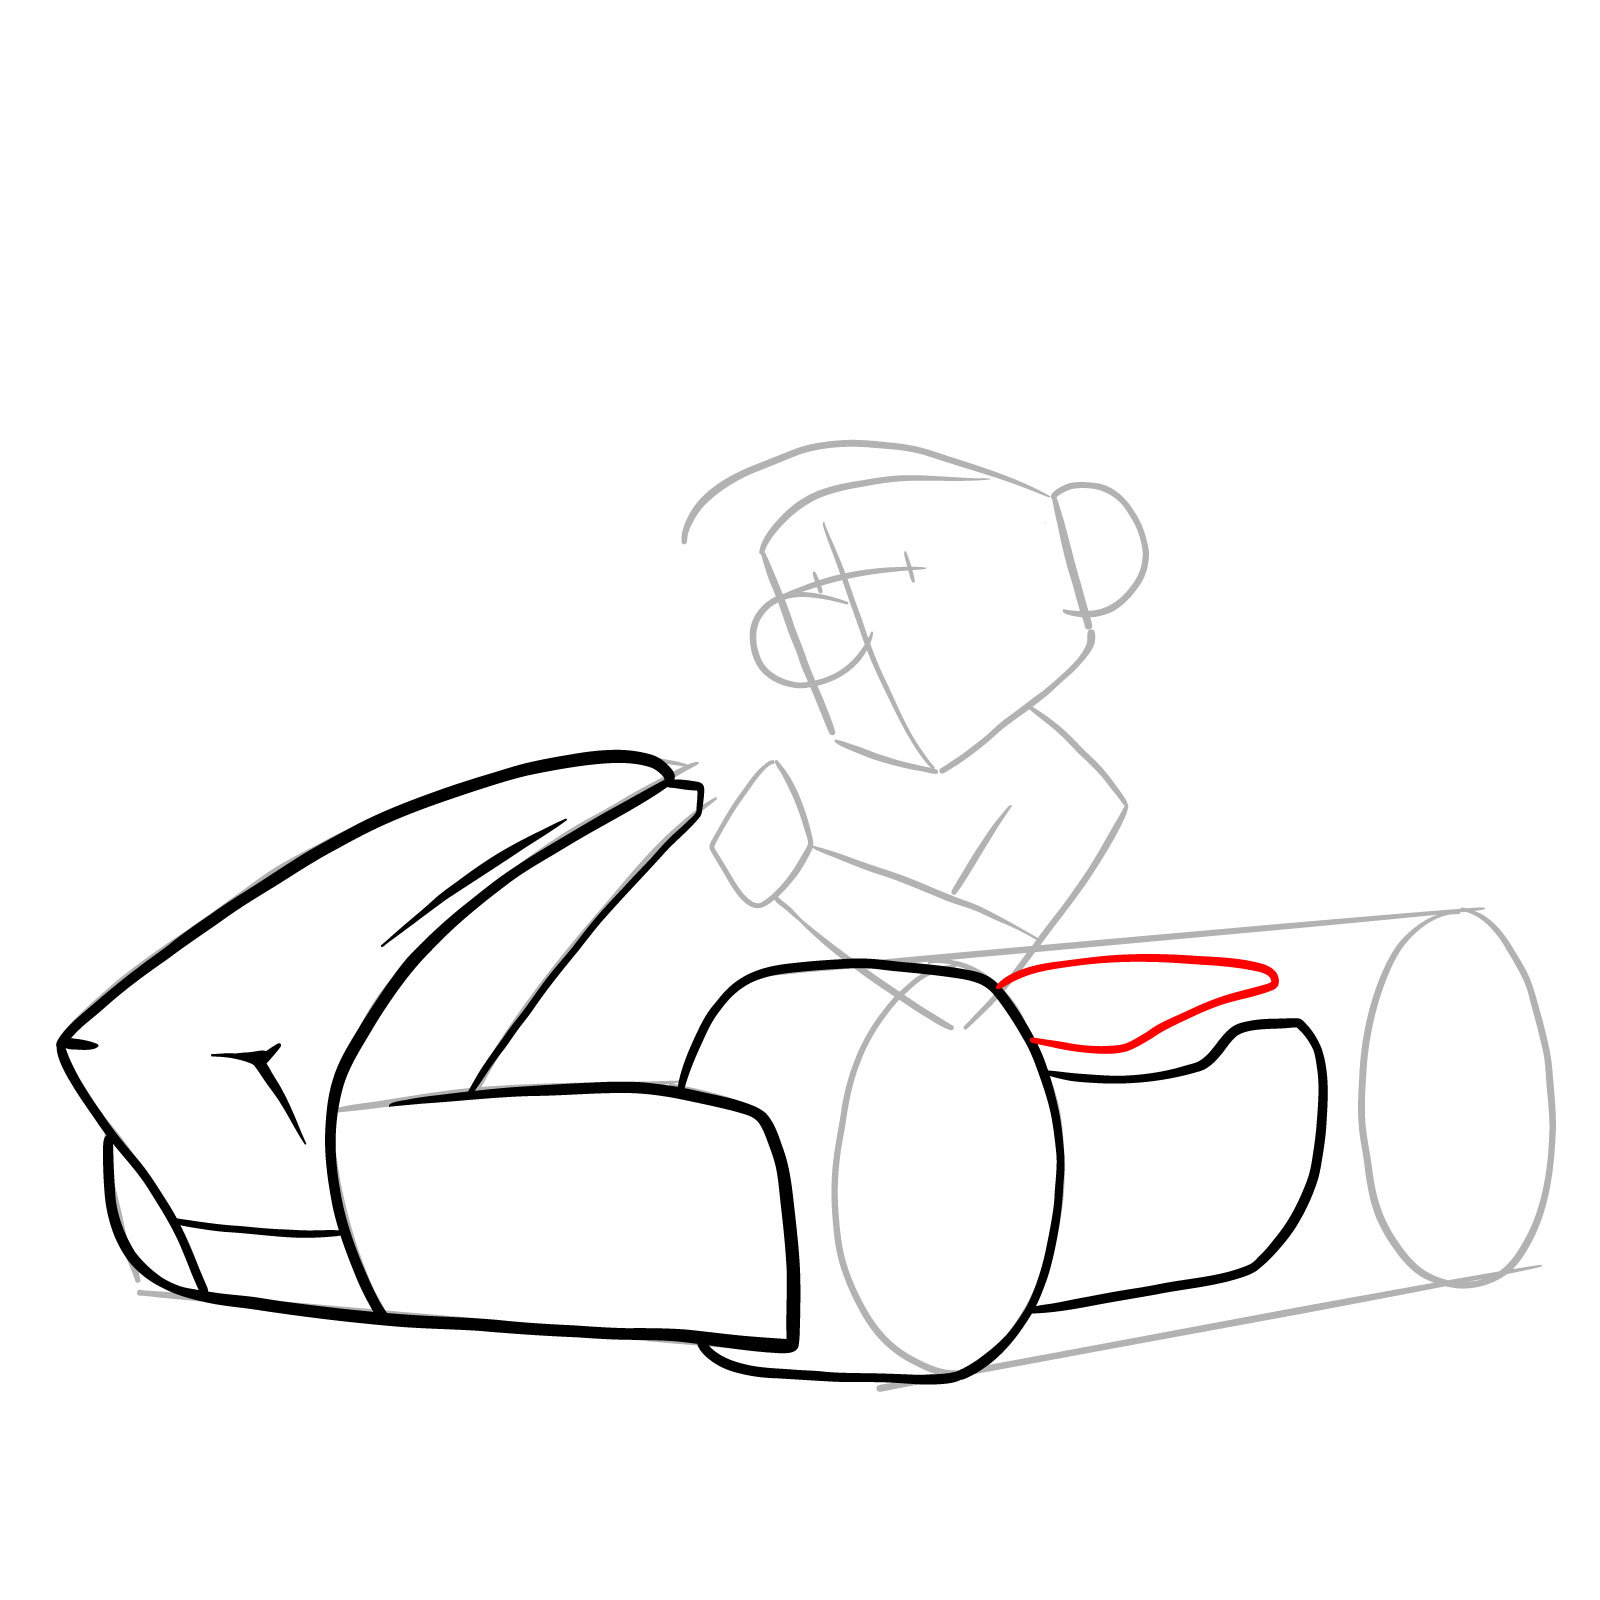 How to draw Race Traitors Mario - step 10